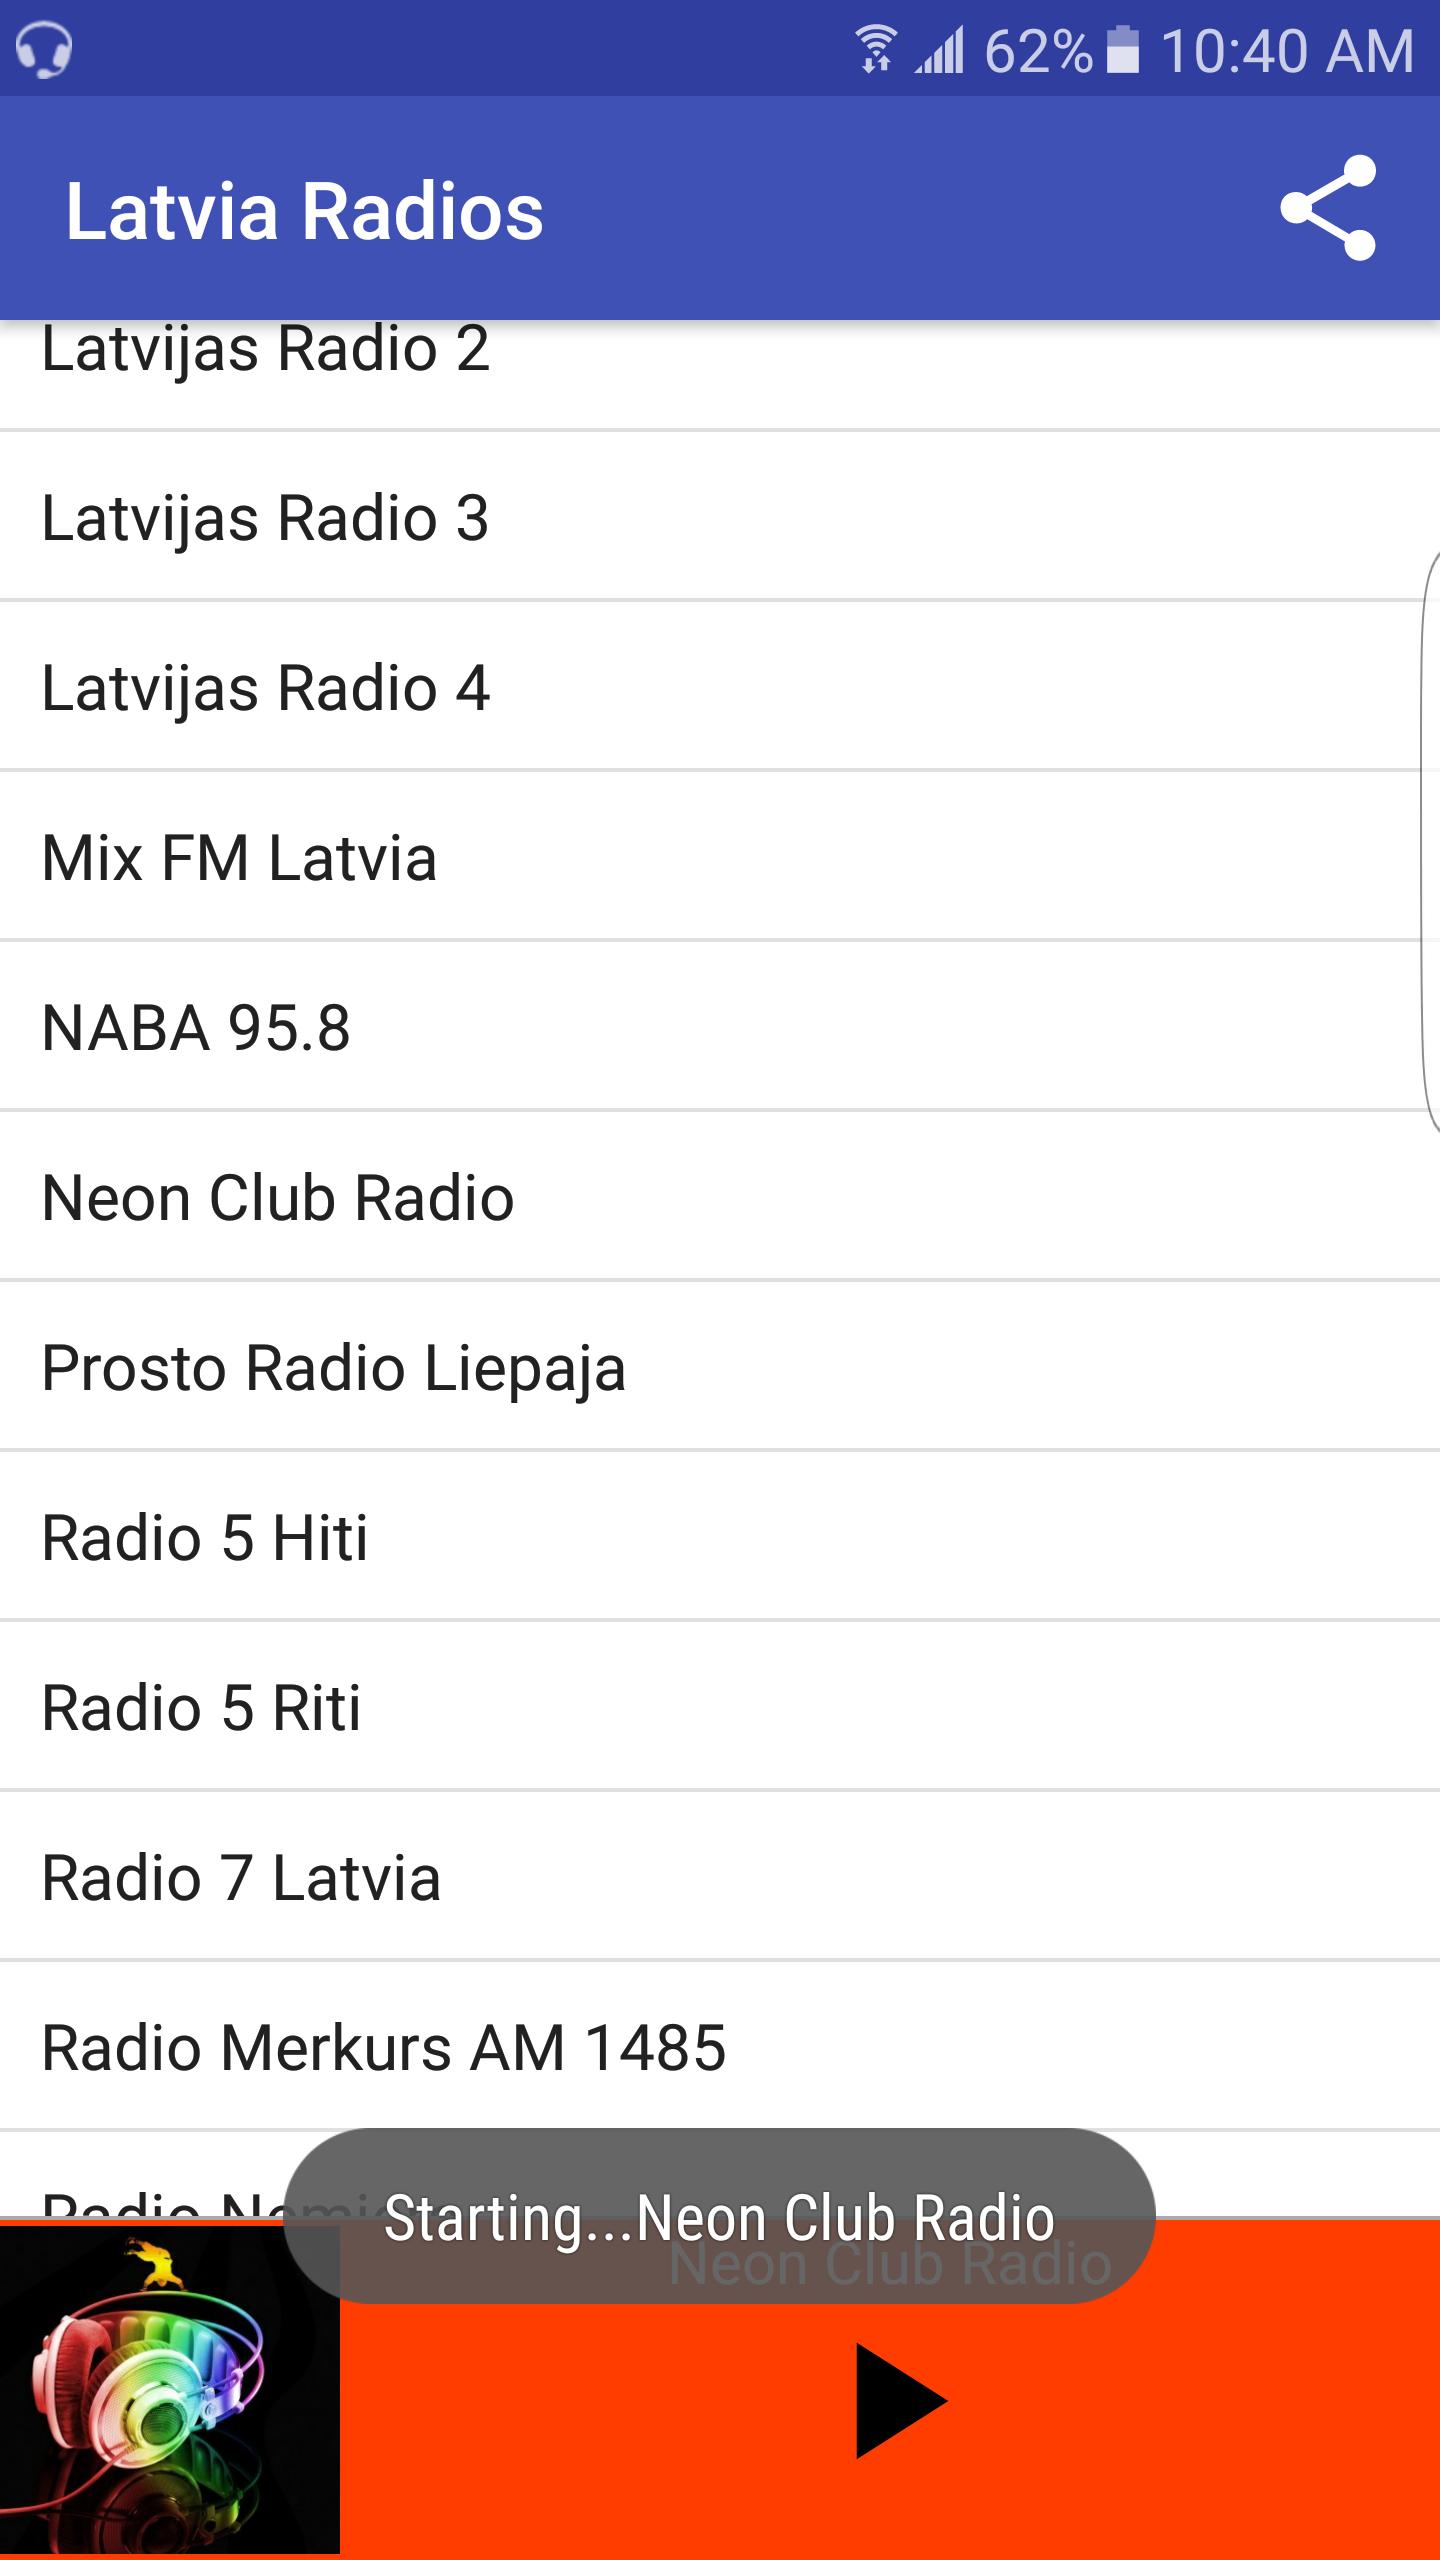 Latvia Radios for Android - APK Download